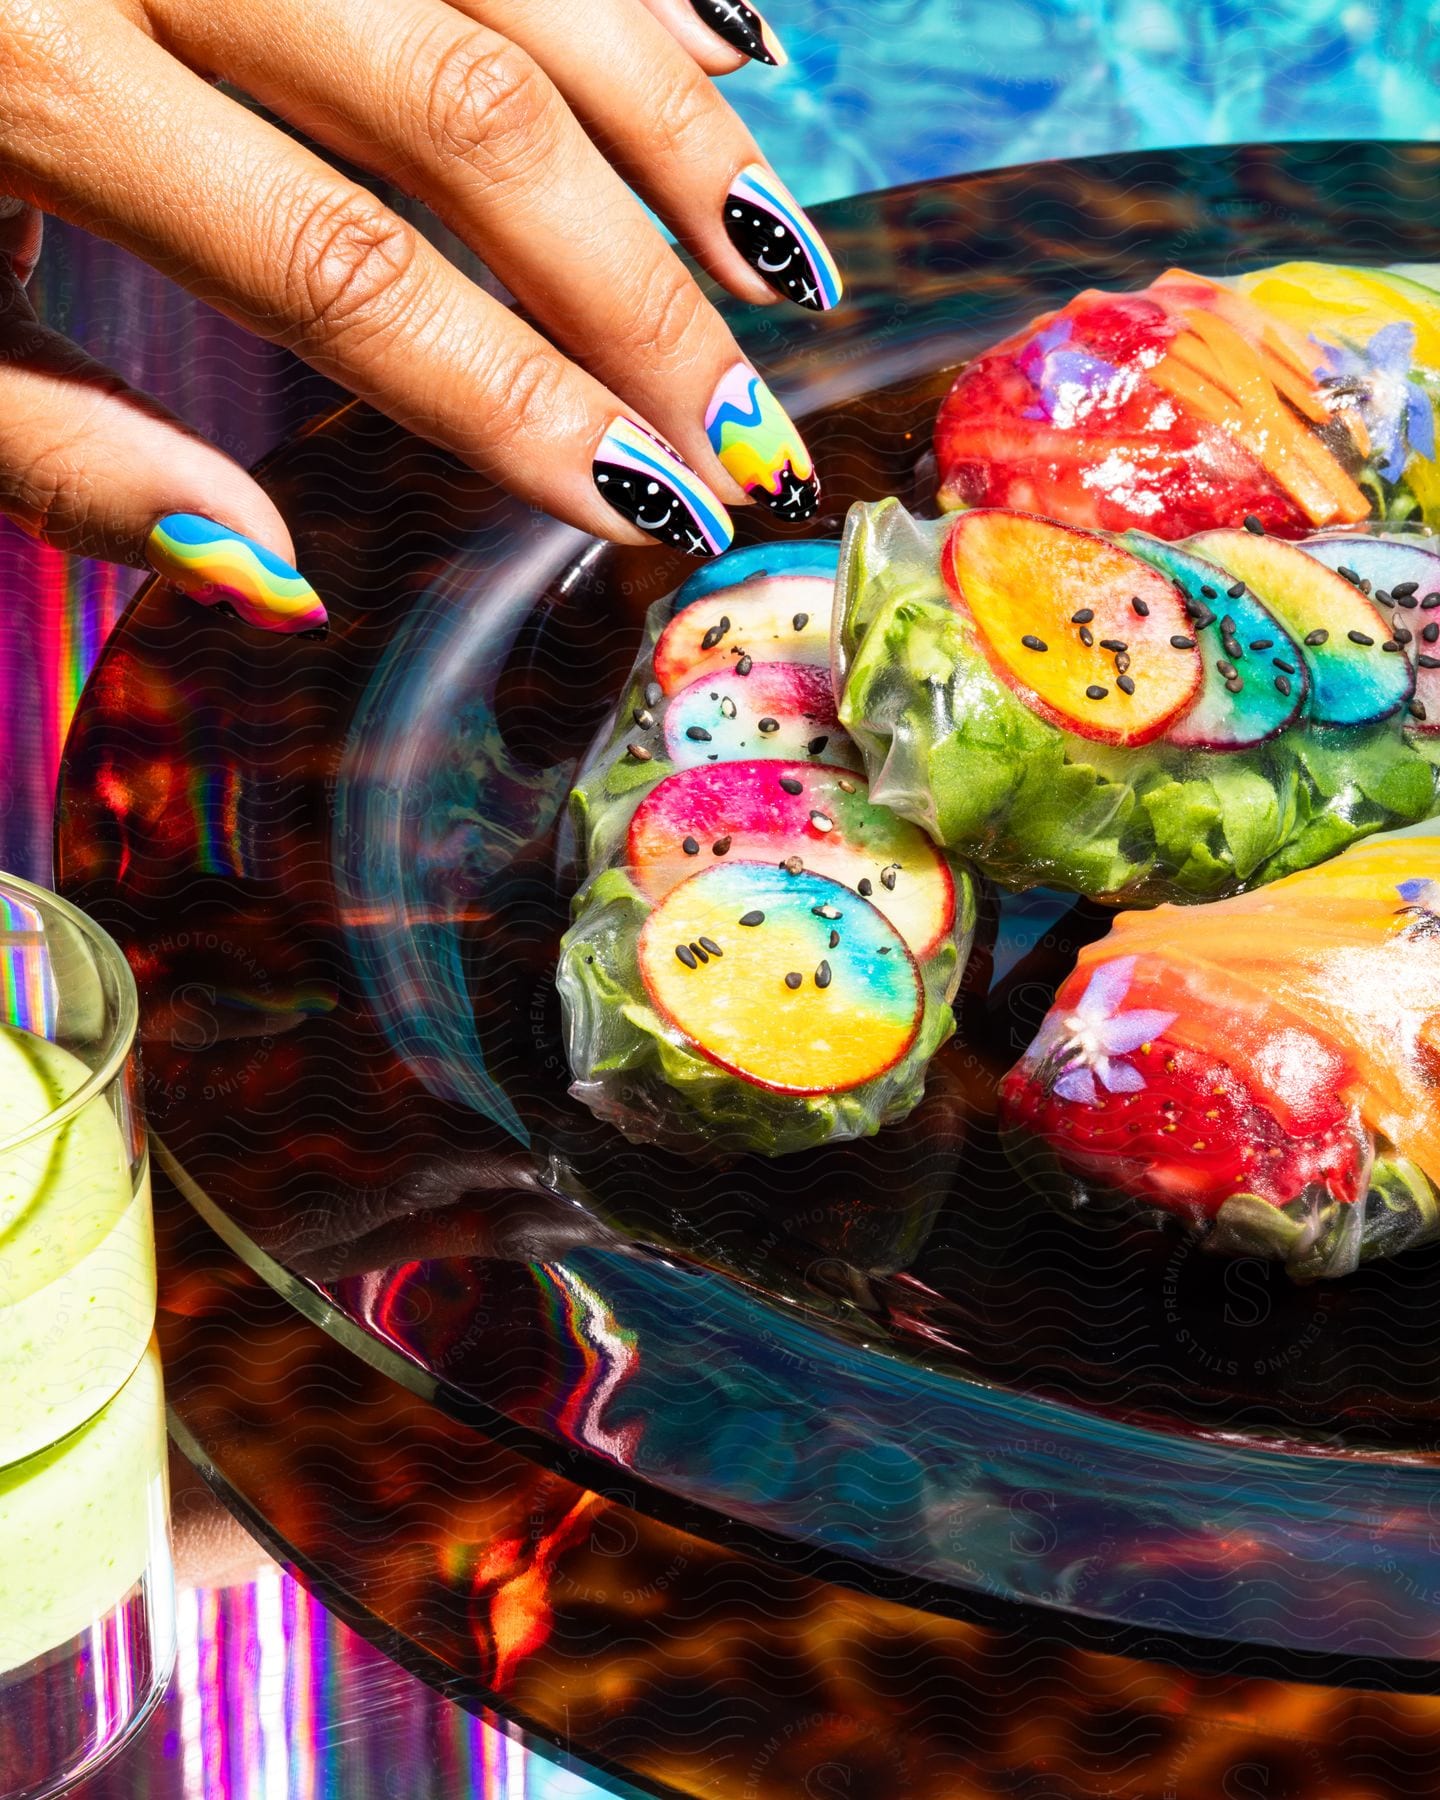 Woman nails painted with colorful colors next to a plate with colorful vegetables